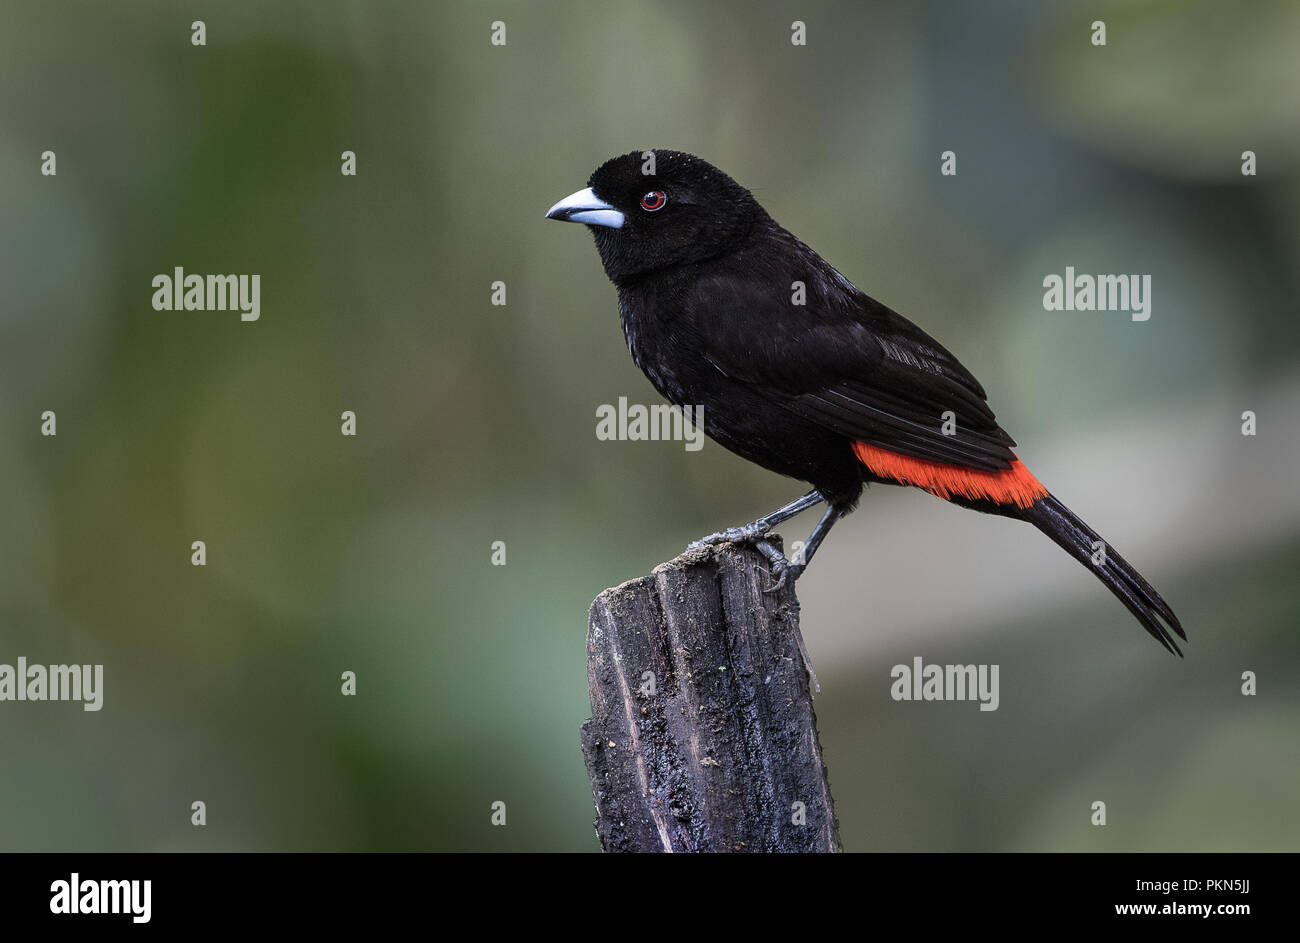 A perched male of Passerini's tanager photographed in Costa Rica Stock Photo